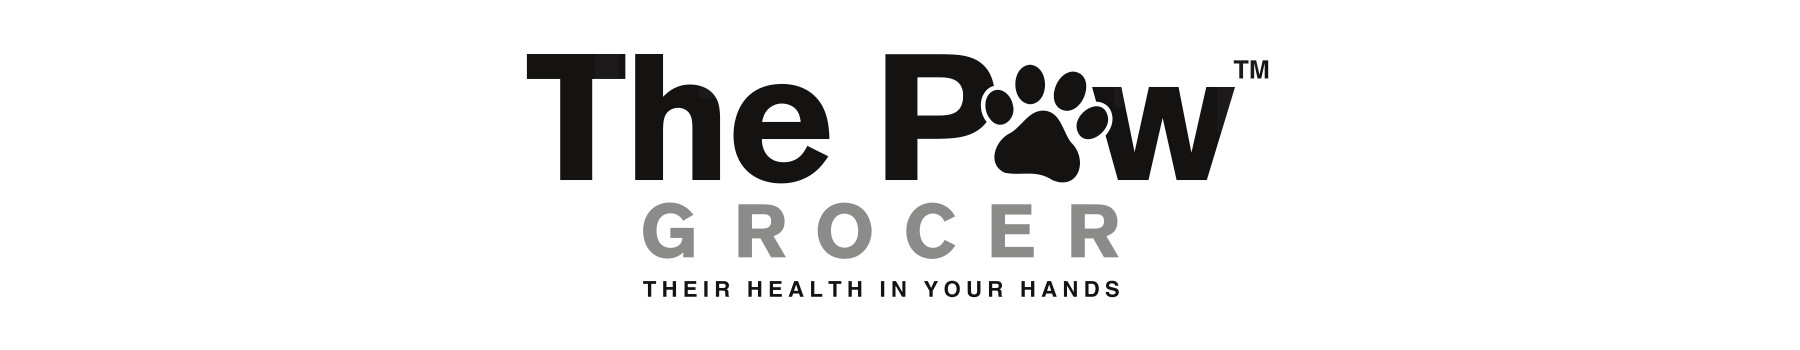 The Paw Grocer